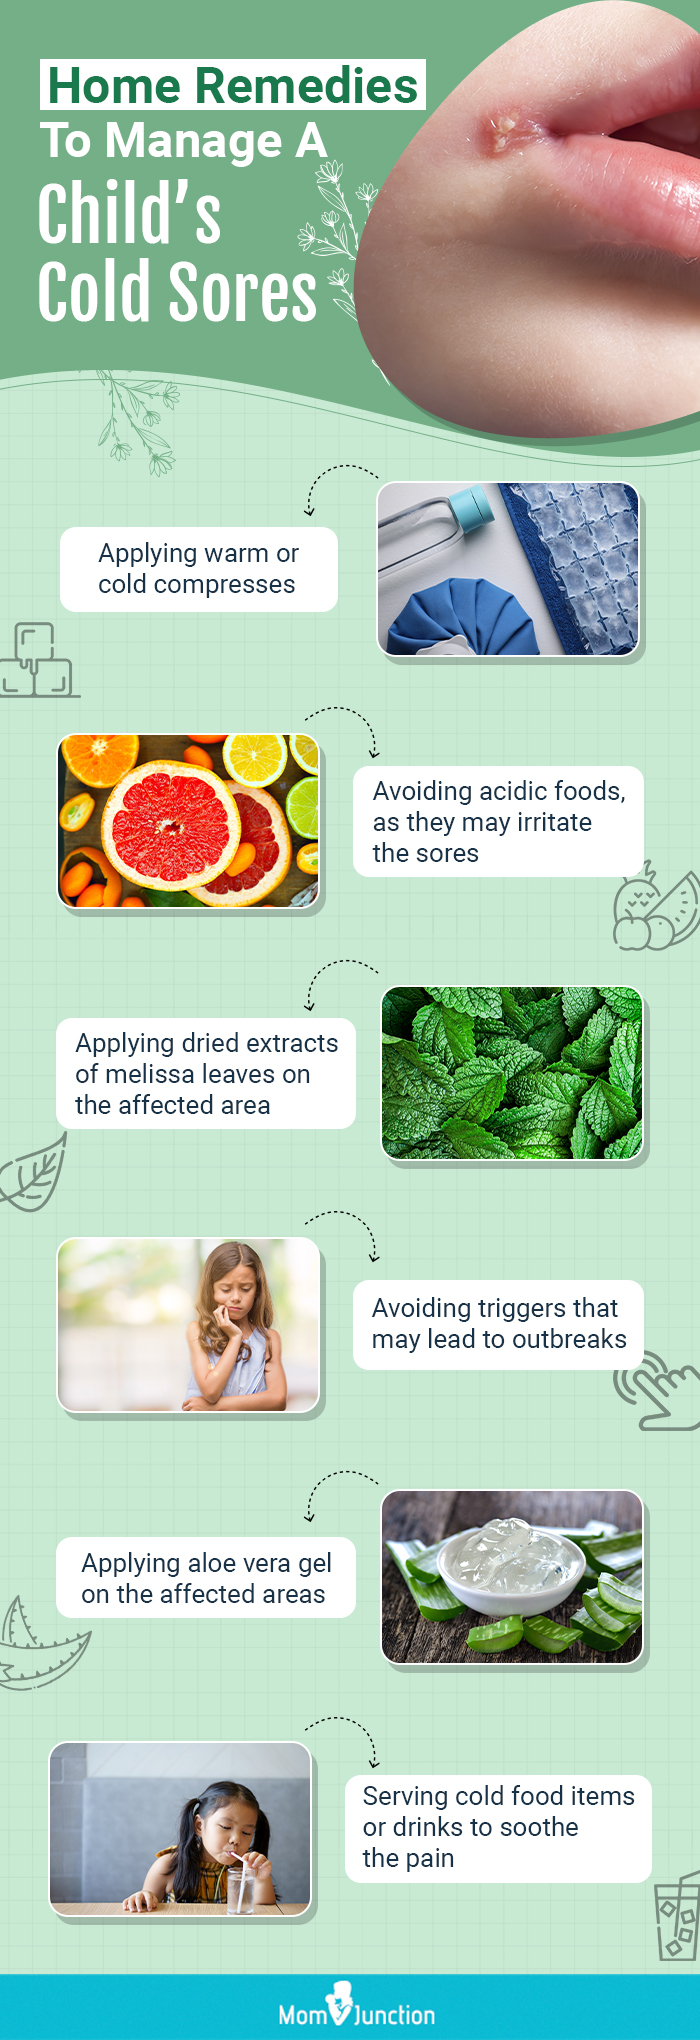 home remedies to manage a child’s cold sores (infographic)